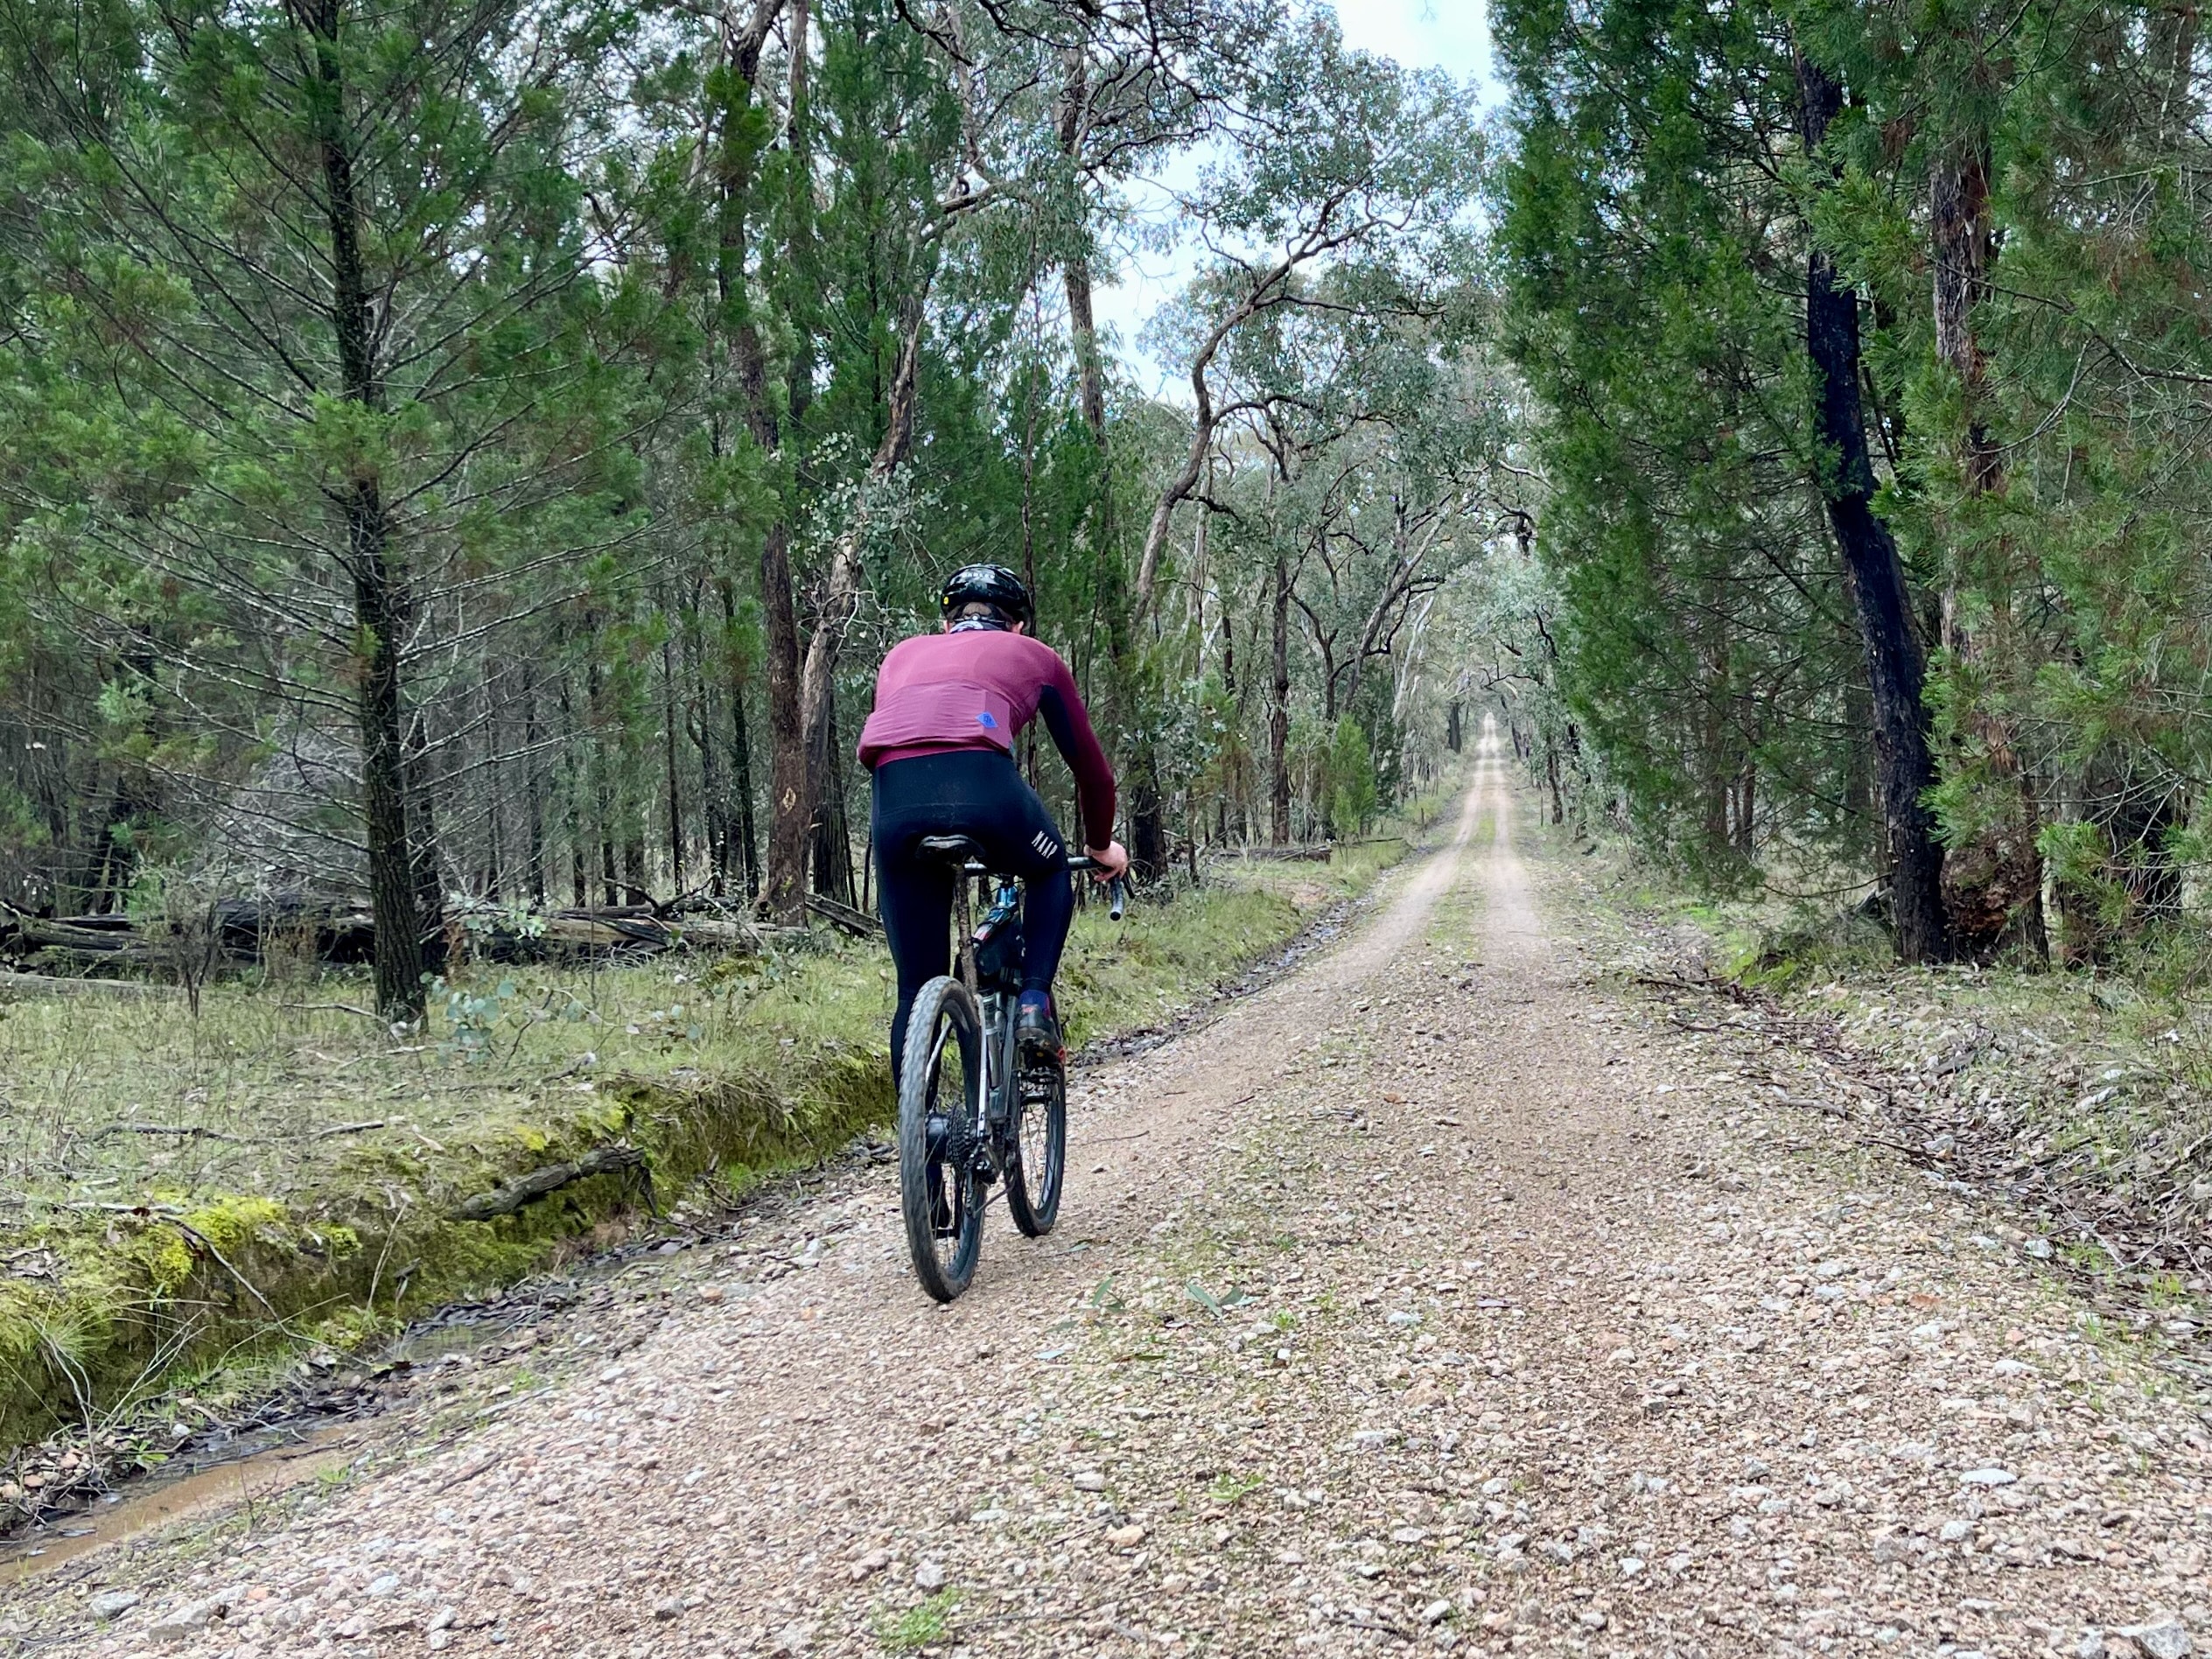 A cyclist riding on a chunky gravel road that is gently rising up through native bushland